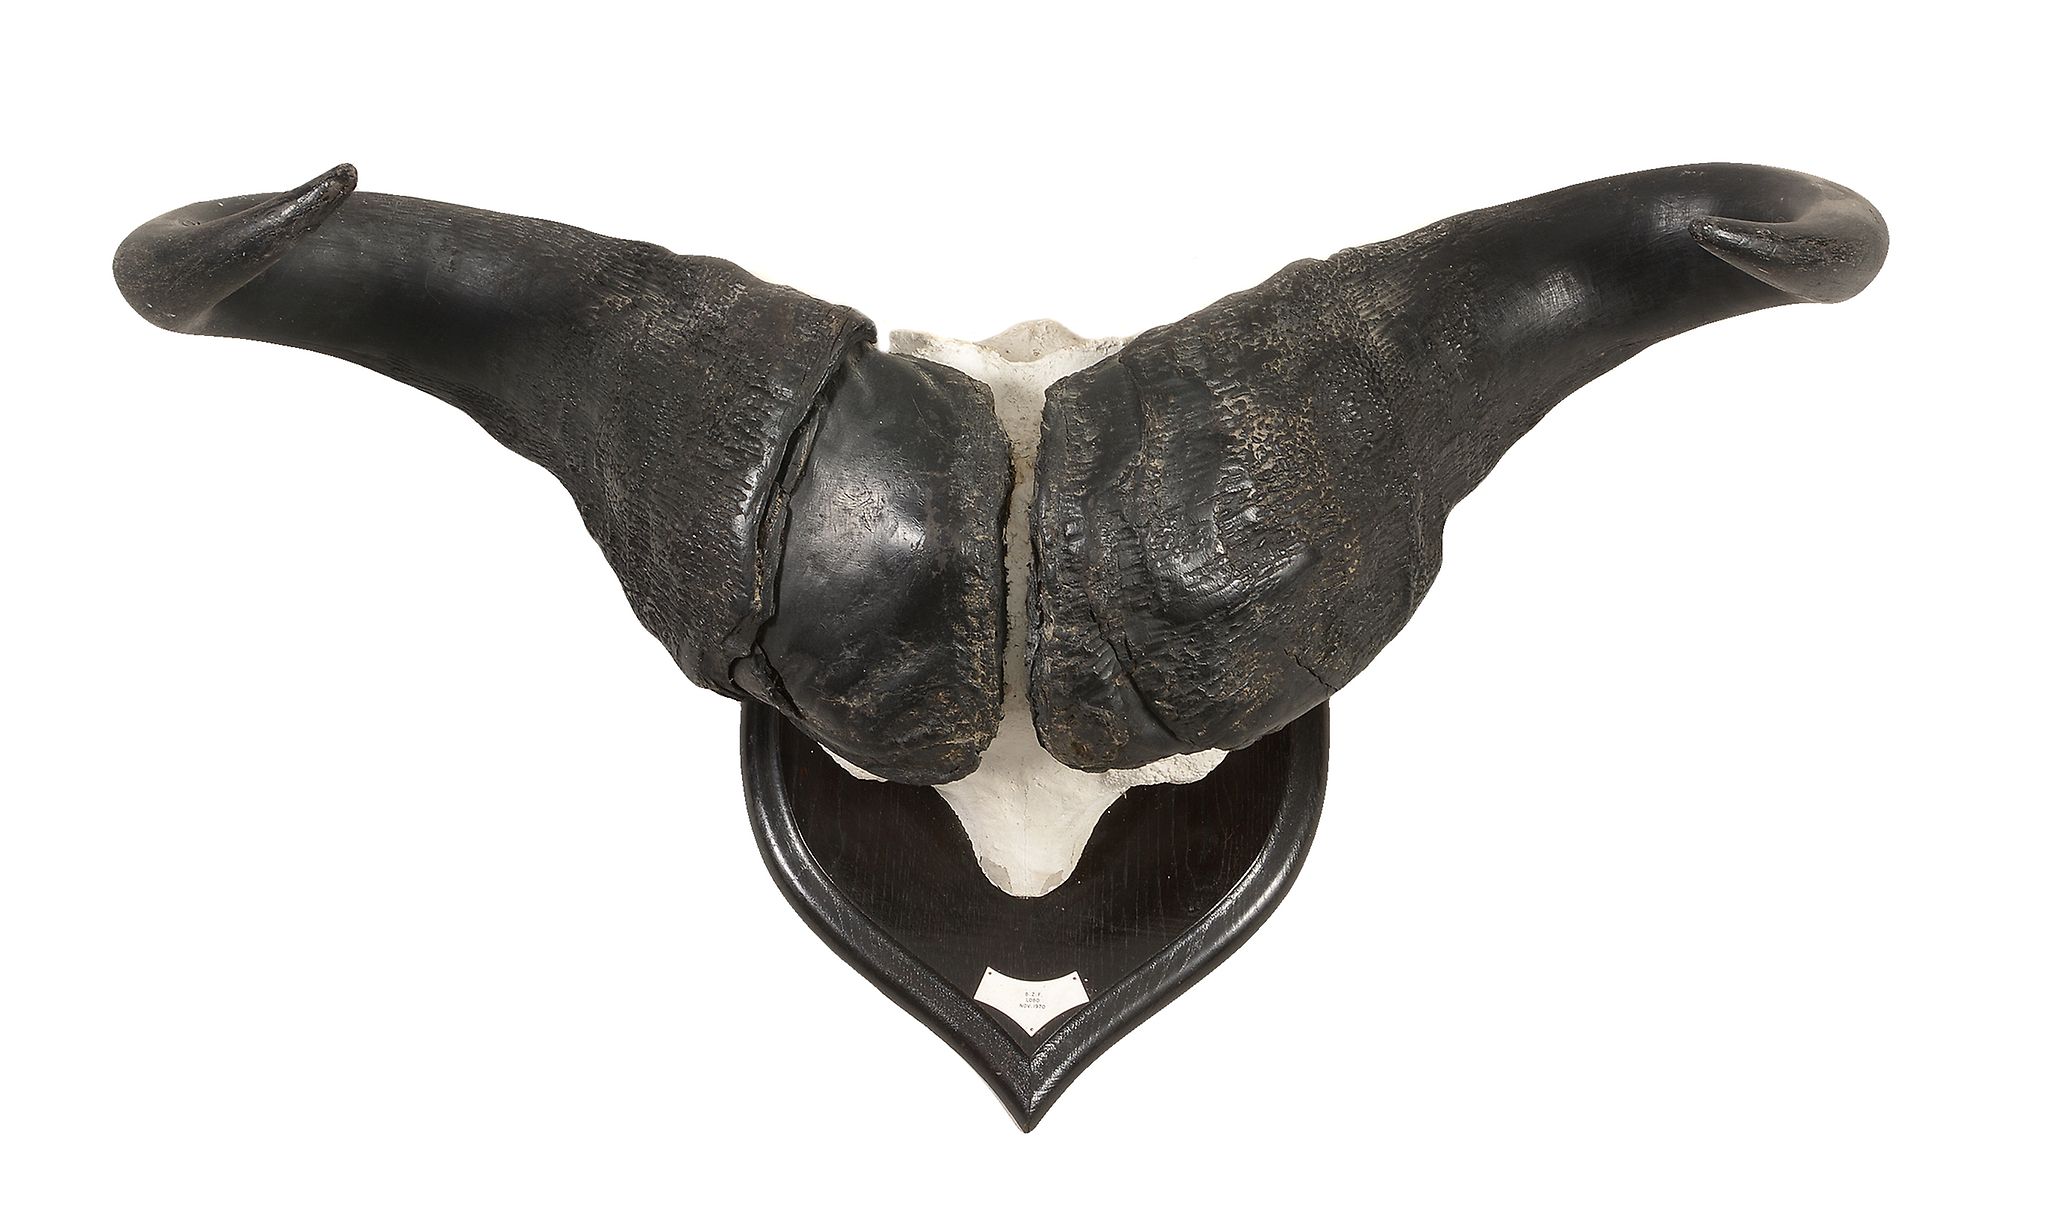 A pair of Tanzanian buffalo horns, dated for 1970 A pair of Tanzanian buffalo horns, dated for